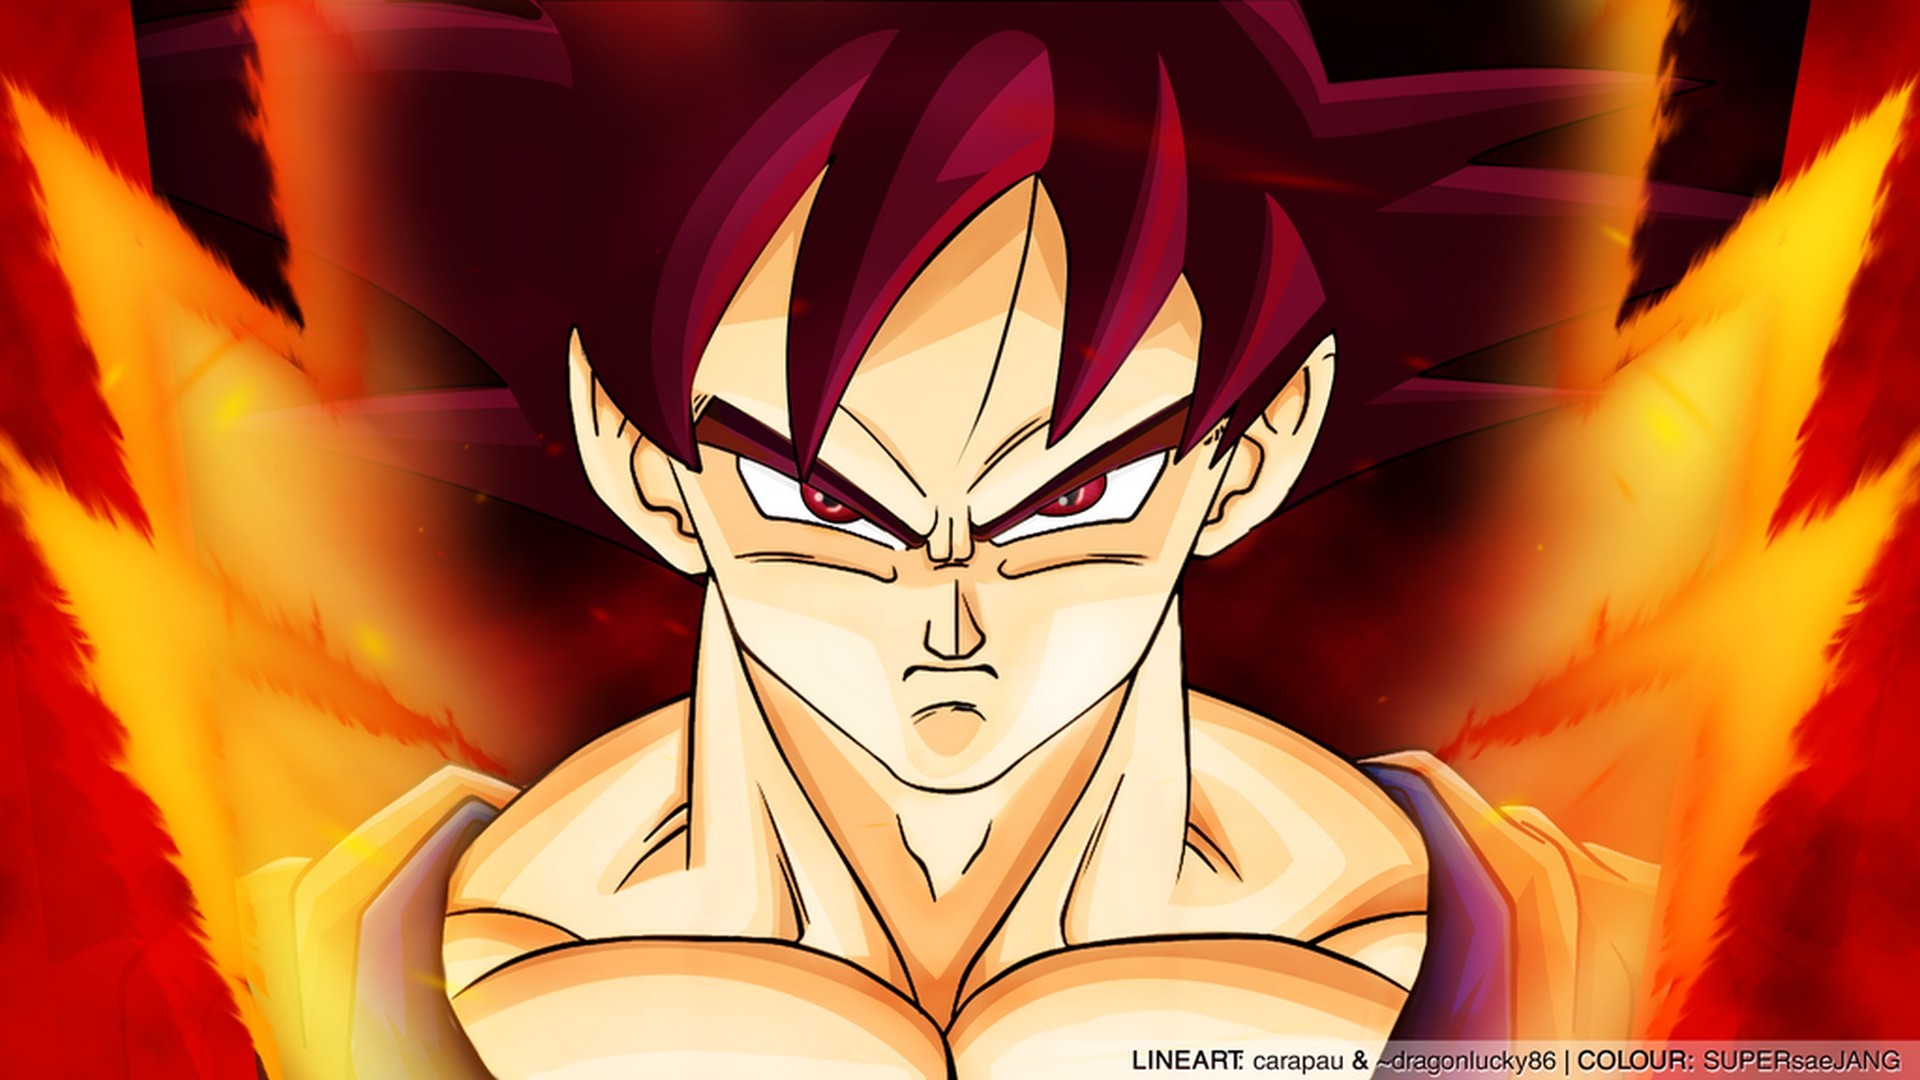 Goku Super Saiyan God Wallpaper HD With Resolution 1920X1080 pixel. You can make this wallpaper for your Desktop Computer Backgrounds, Mac Wallpapers, Android Lock screen or iPhone Screensavers